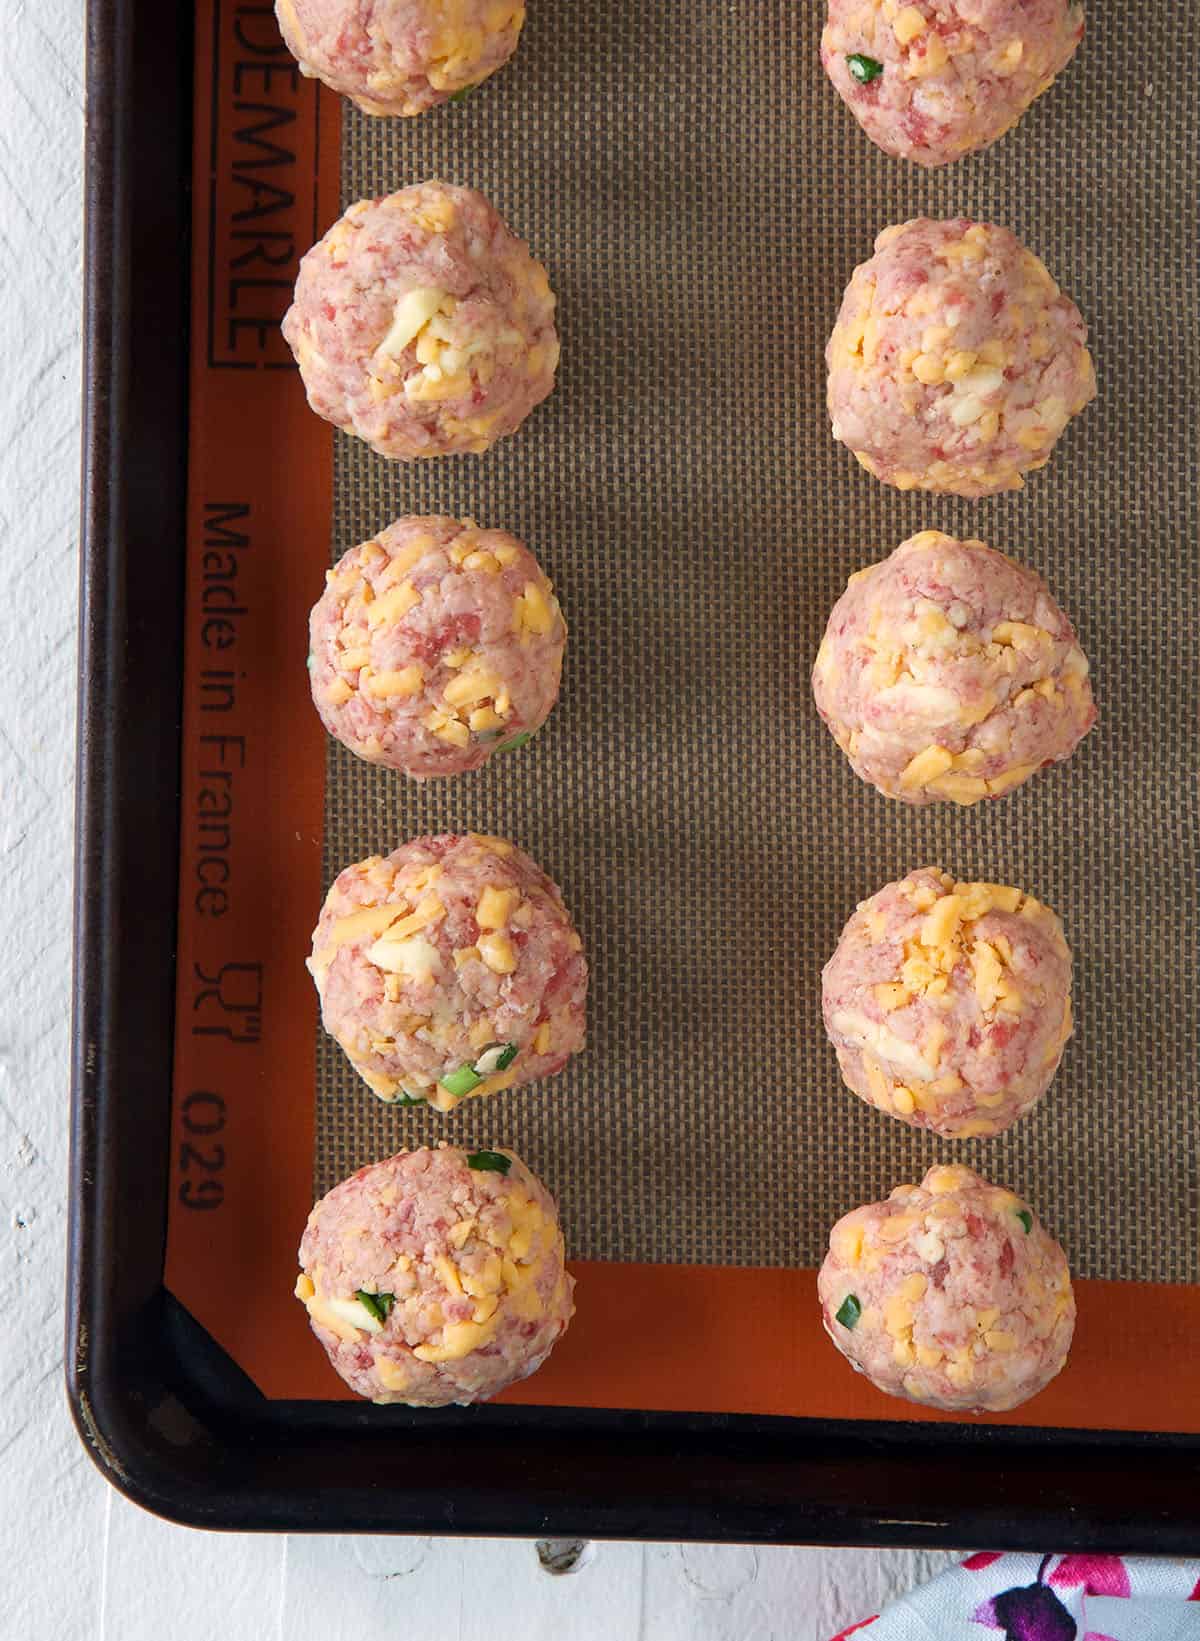 Raw sausage balls are placed on a baking sheet.